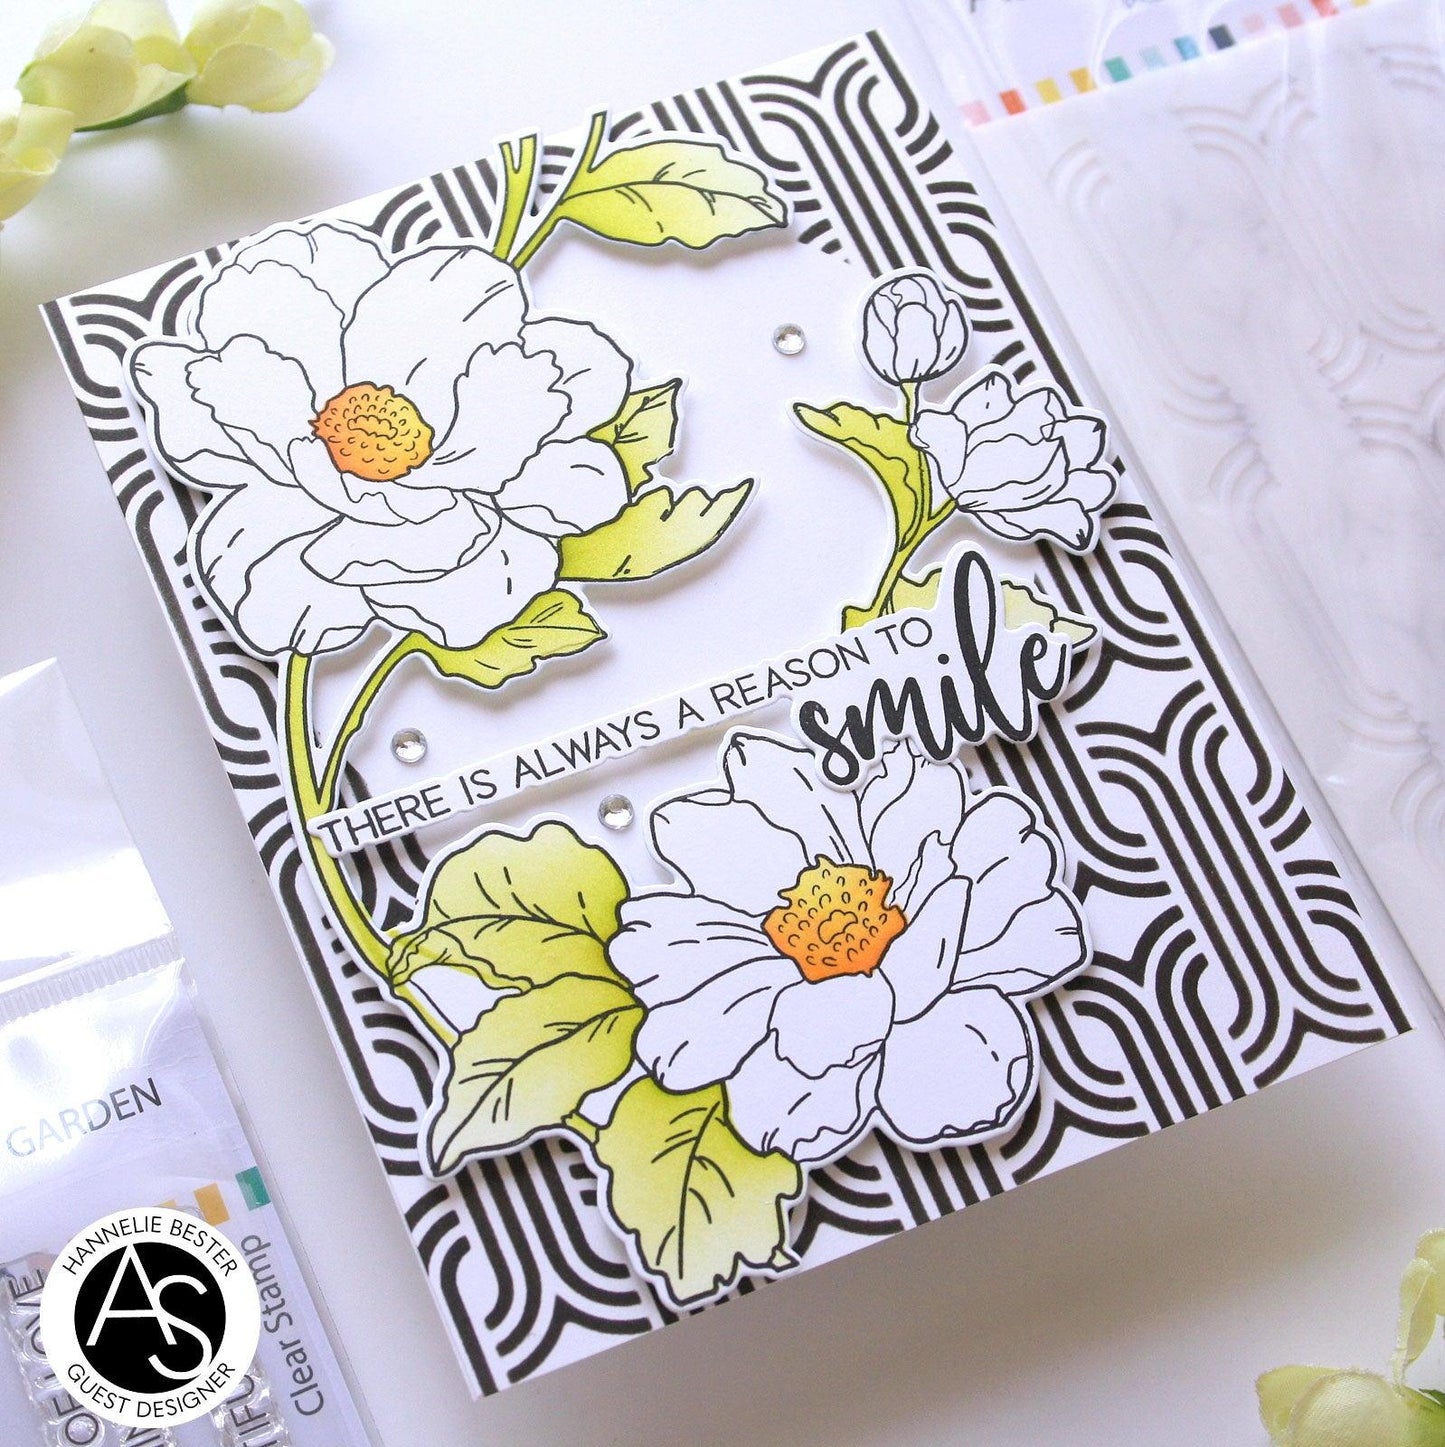 spring-garden-stamp-set-layering-stencil-alex-syberia-designs-flowers-coloring-cardmaking-tutorials-blog-love-you-cascards-clean-and-simple-cards-smile-sentiment-die